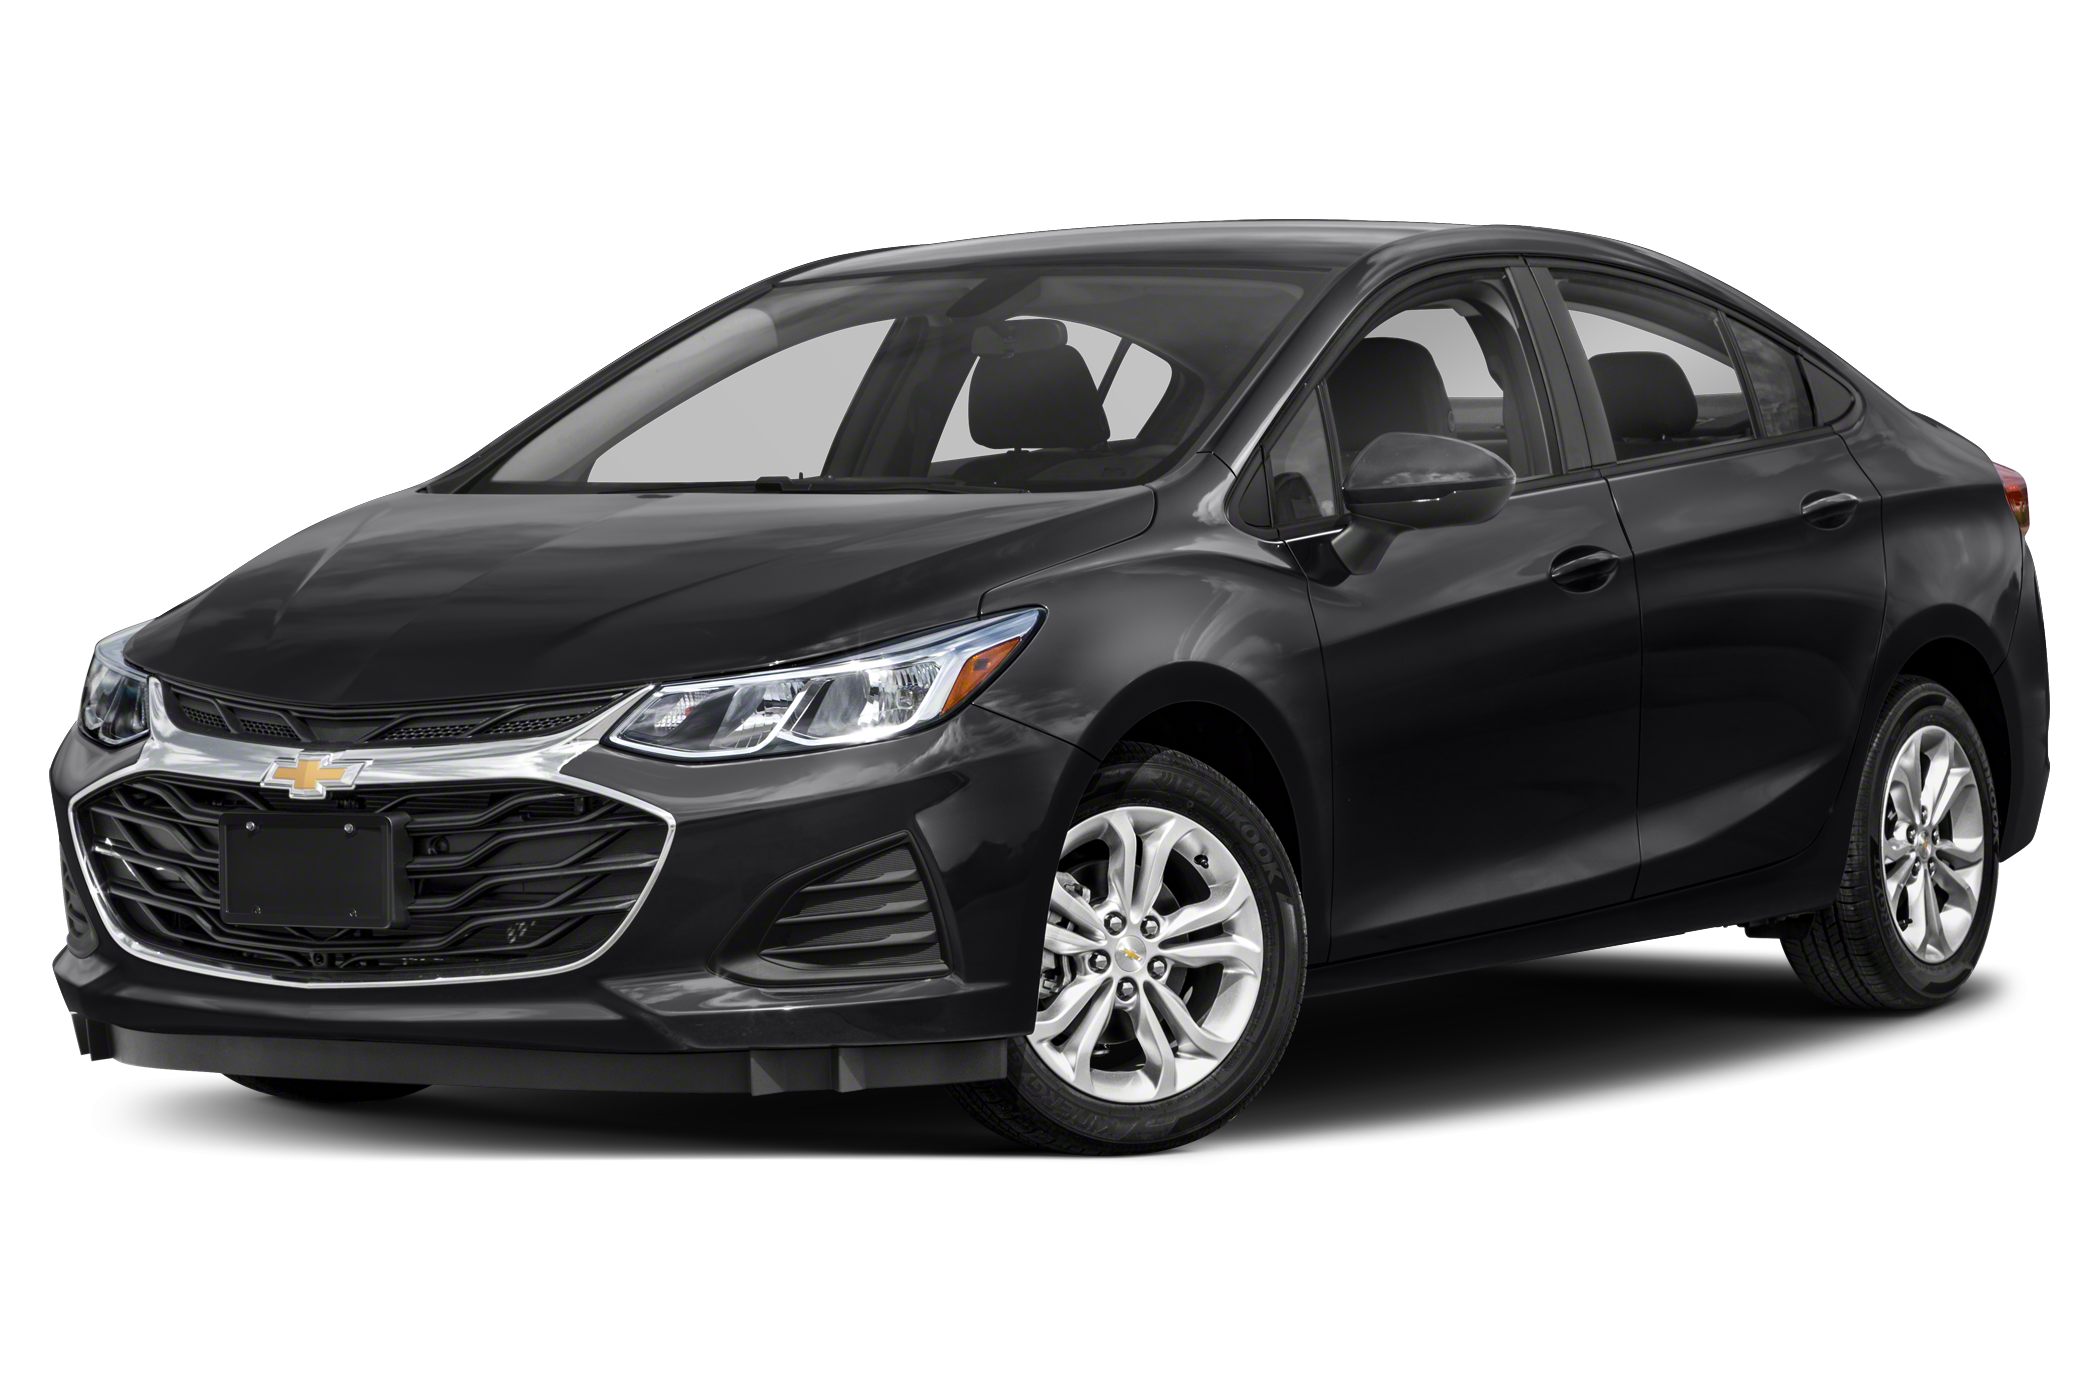 2012 Chevrolet Cruze Wagon blends style with utility